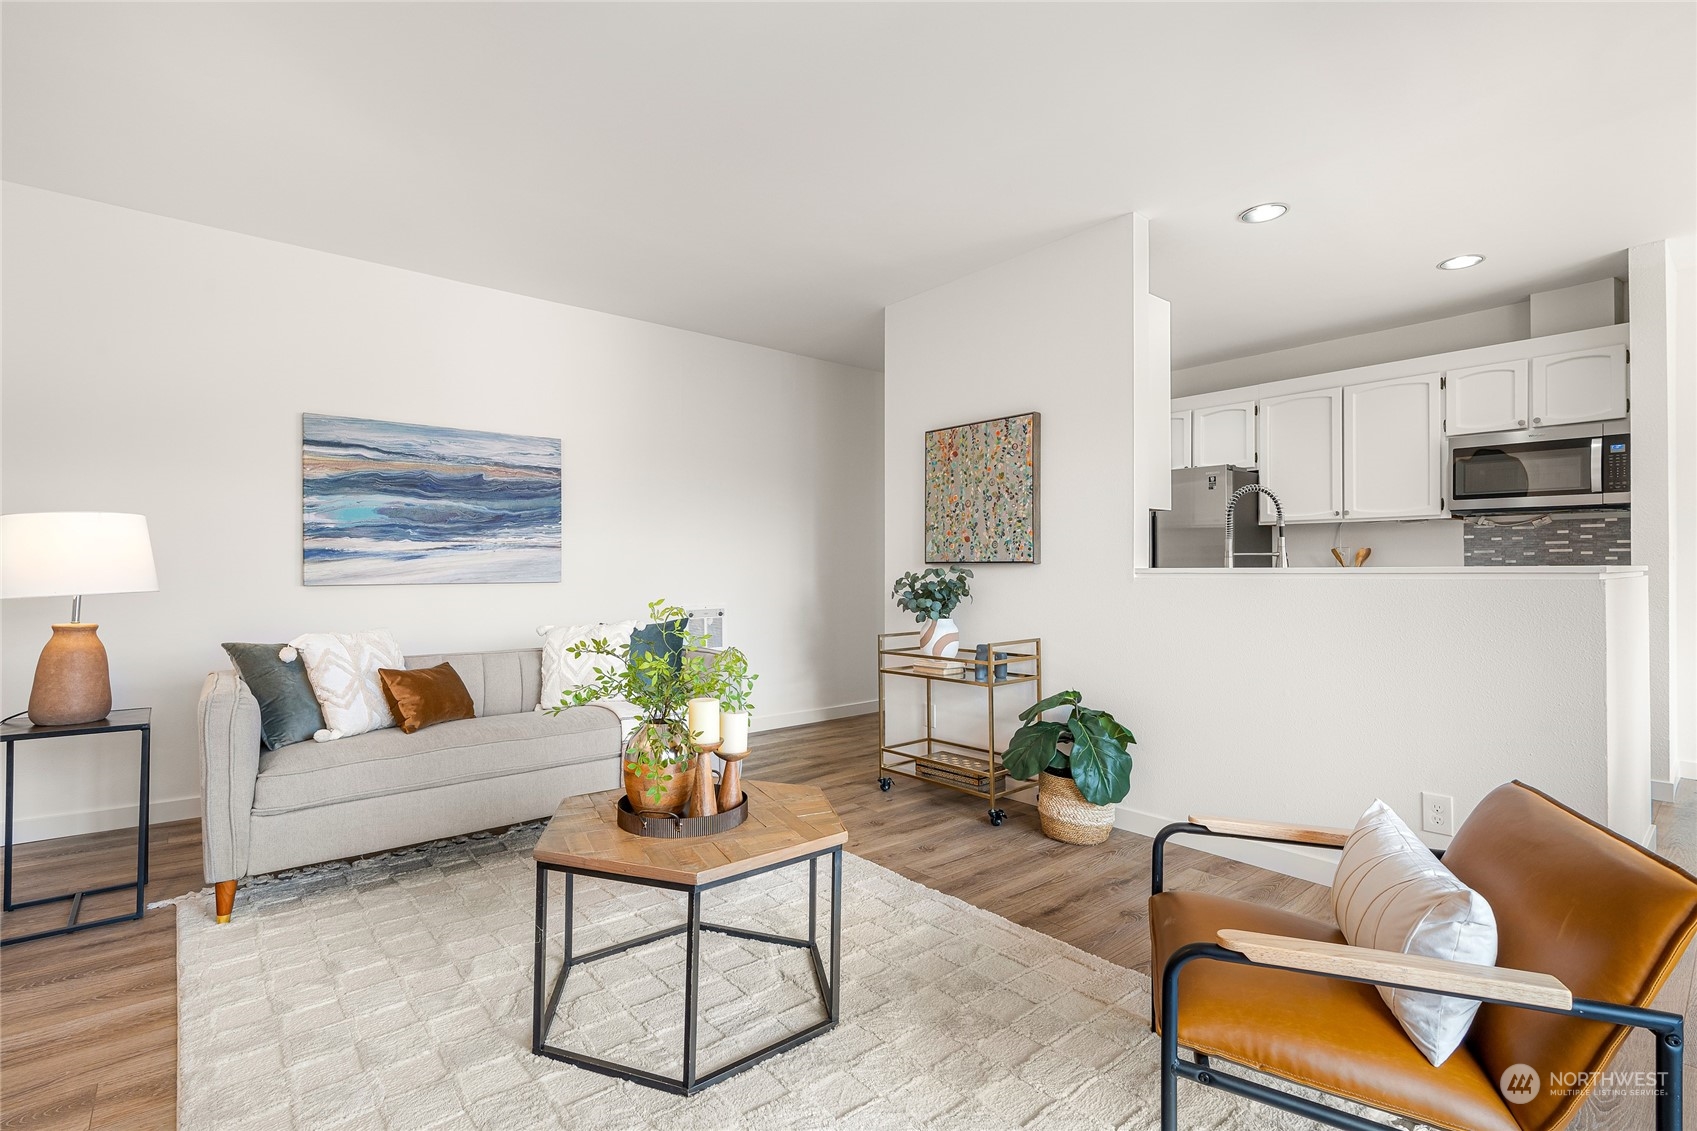 2028 Waverly Place N Unit 101, Seattle, Washington, 98109, United States, 2 Bedrooms Bedrooms, ,1 BathroomBathrooms,Residential,For Sale,2028 Waverly Place N Unit 101,1499931